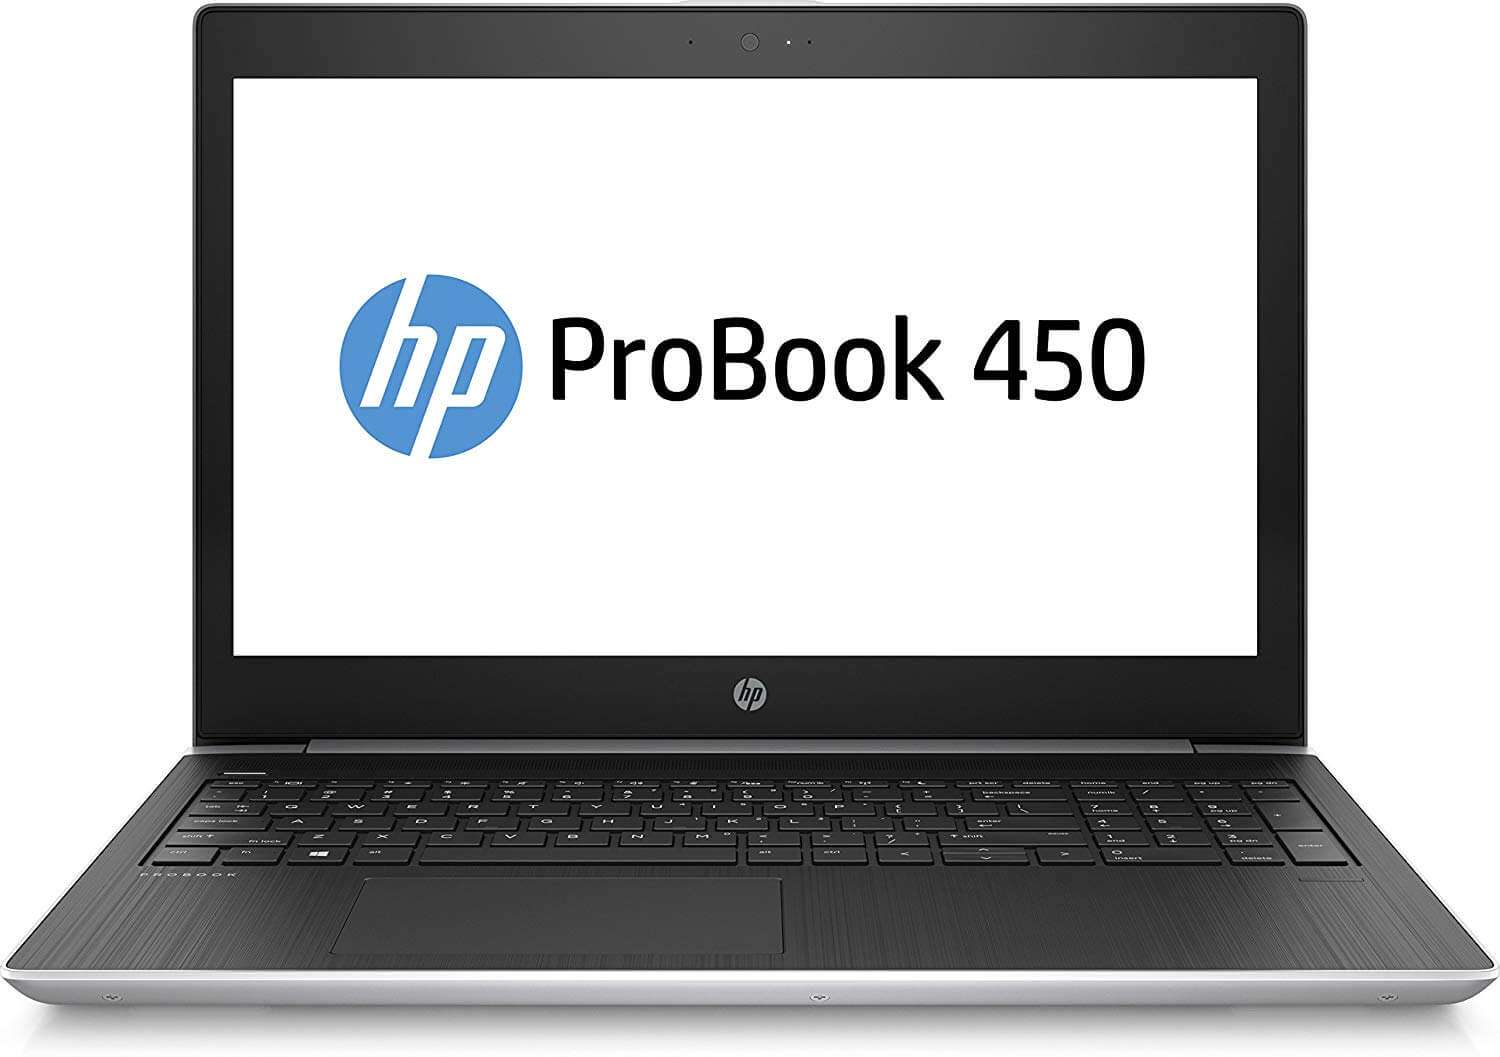 hp ProBook 450G5 Notebook With 15.6-Inch Display, Core i5 Processor/4GB RAM/500GB HDD/Intel UHD Graphics 620 Silver